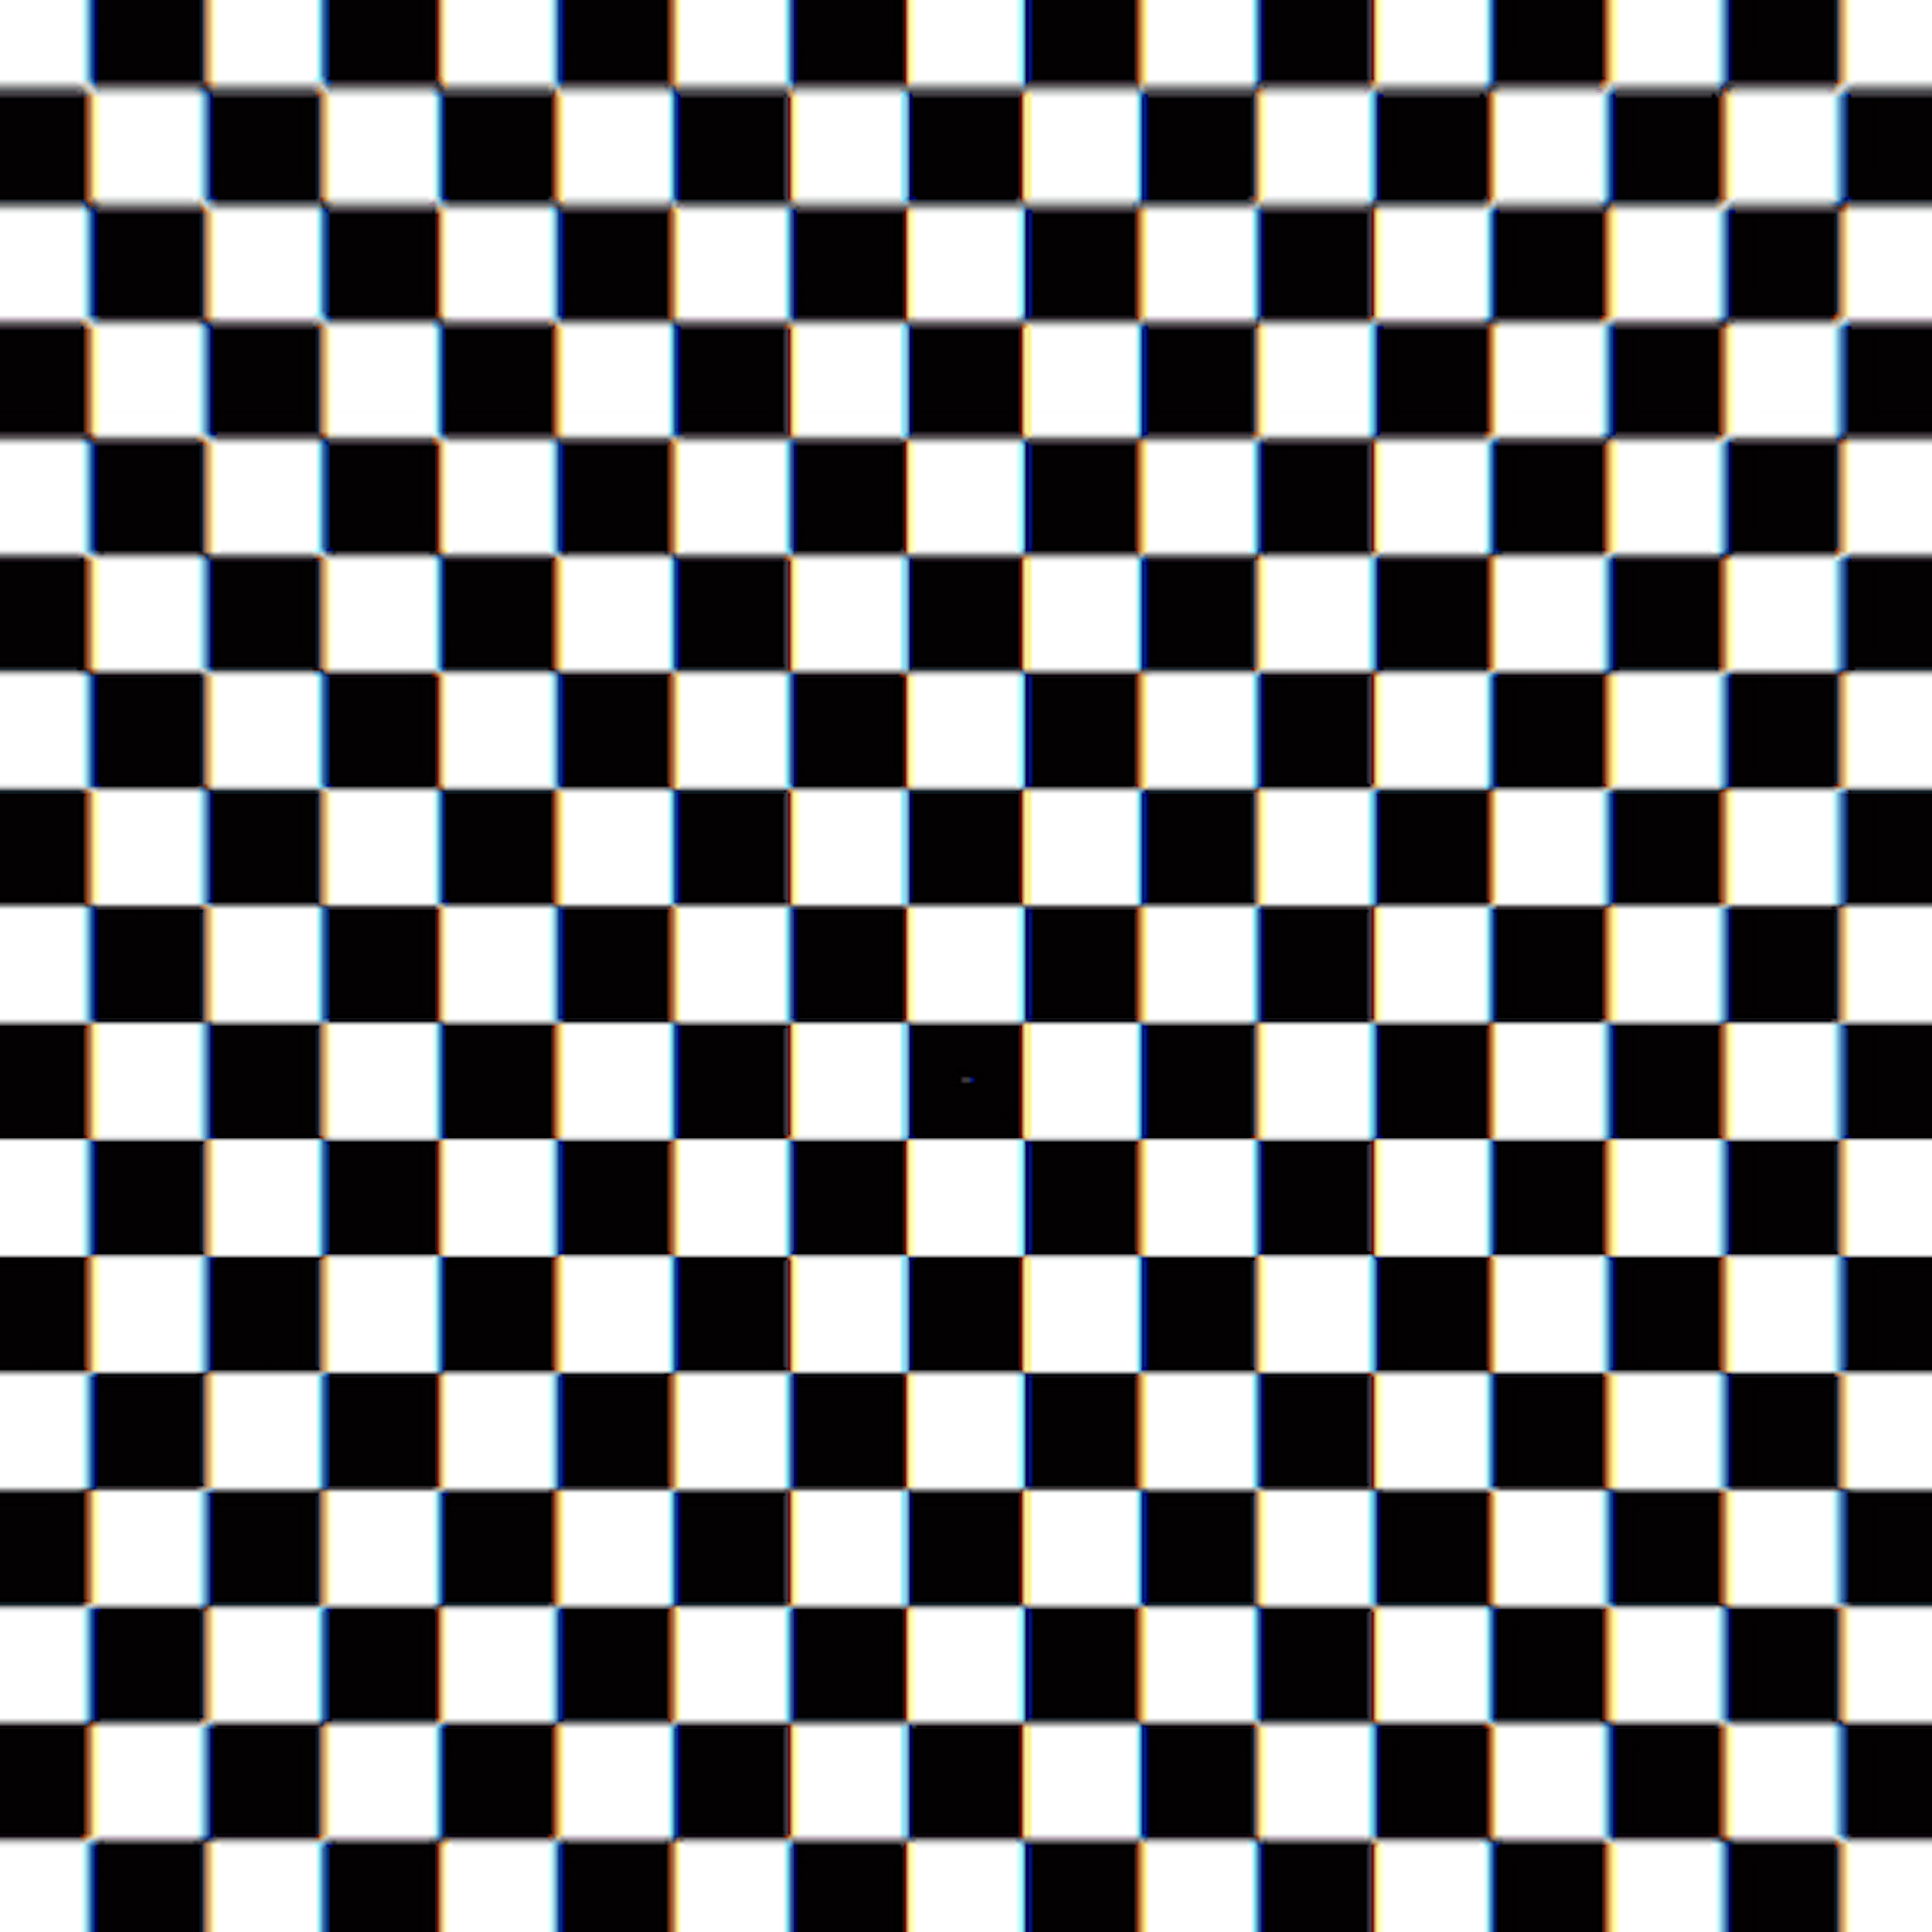 A black and white squares multiply creating a zoomed in effect.